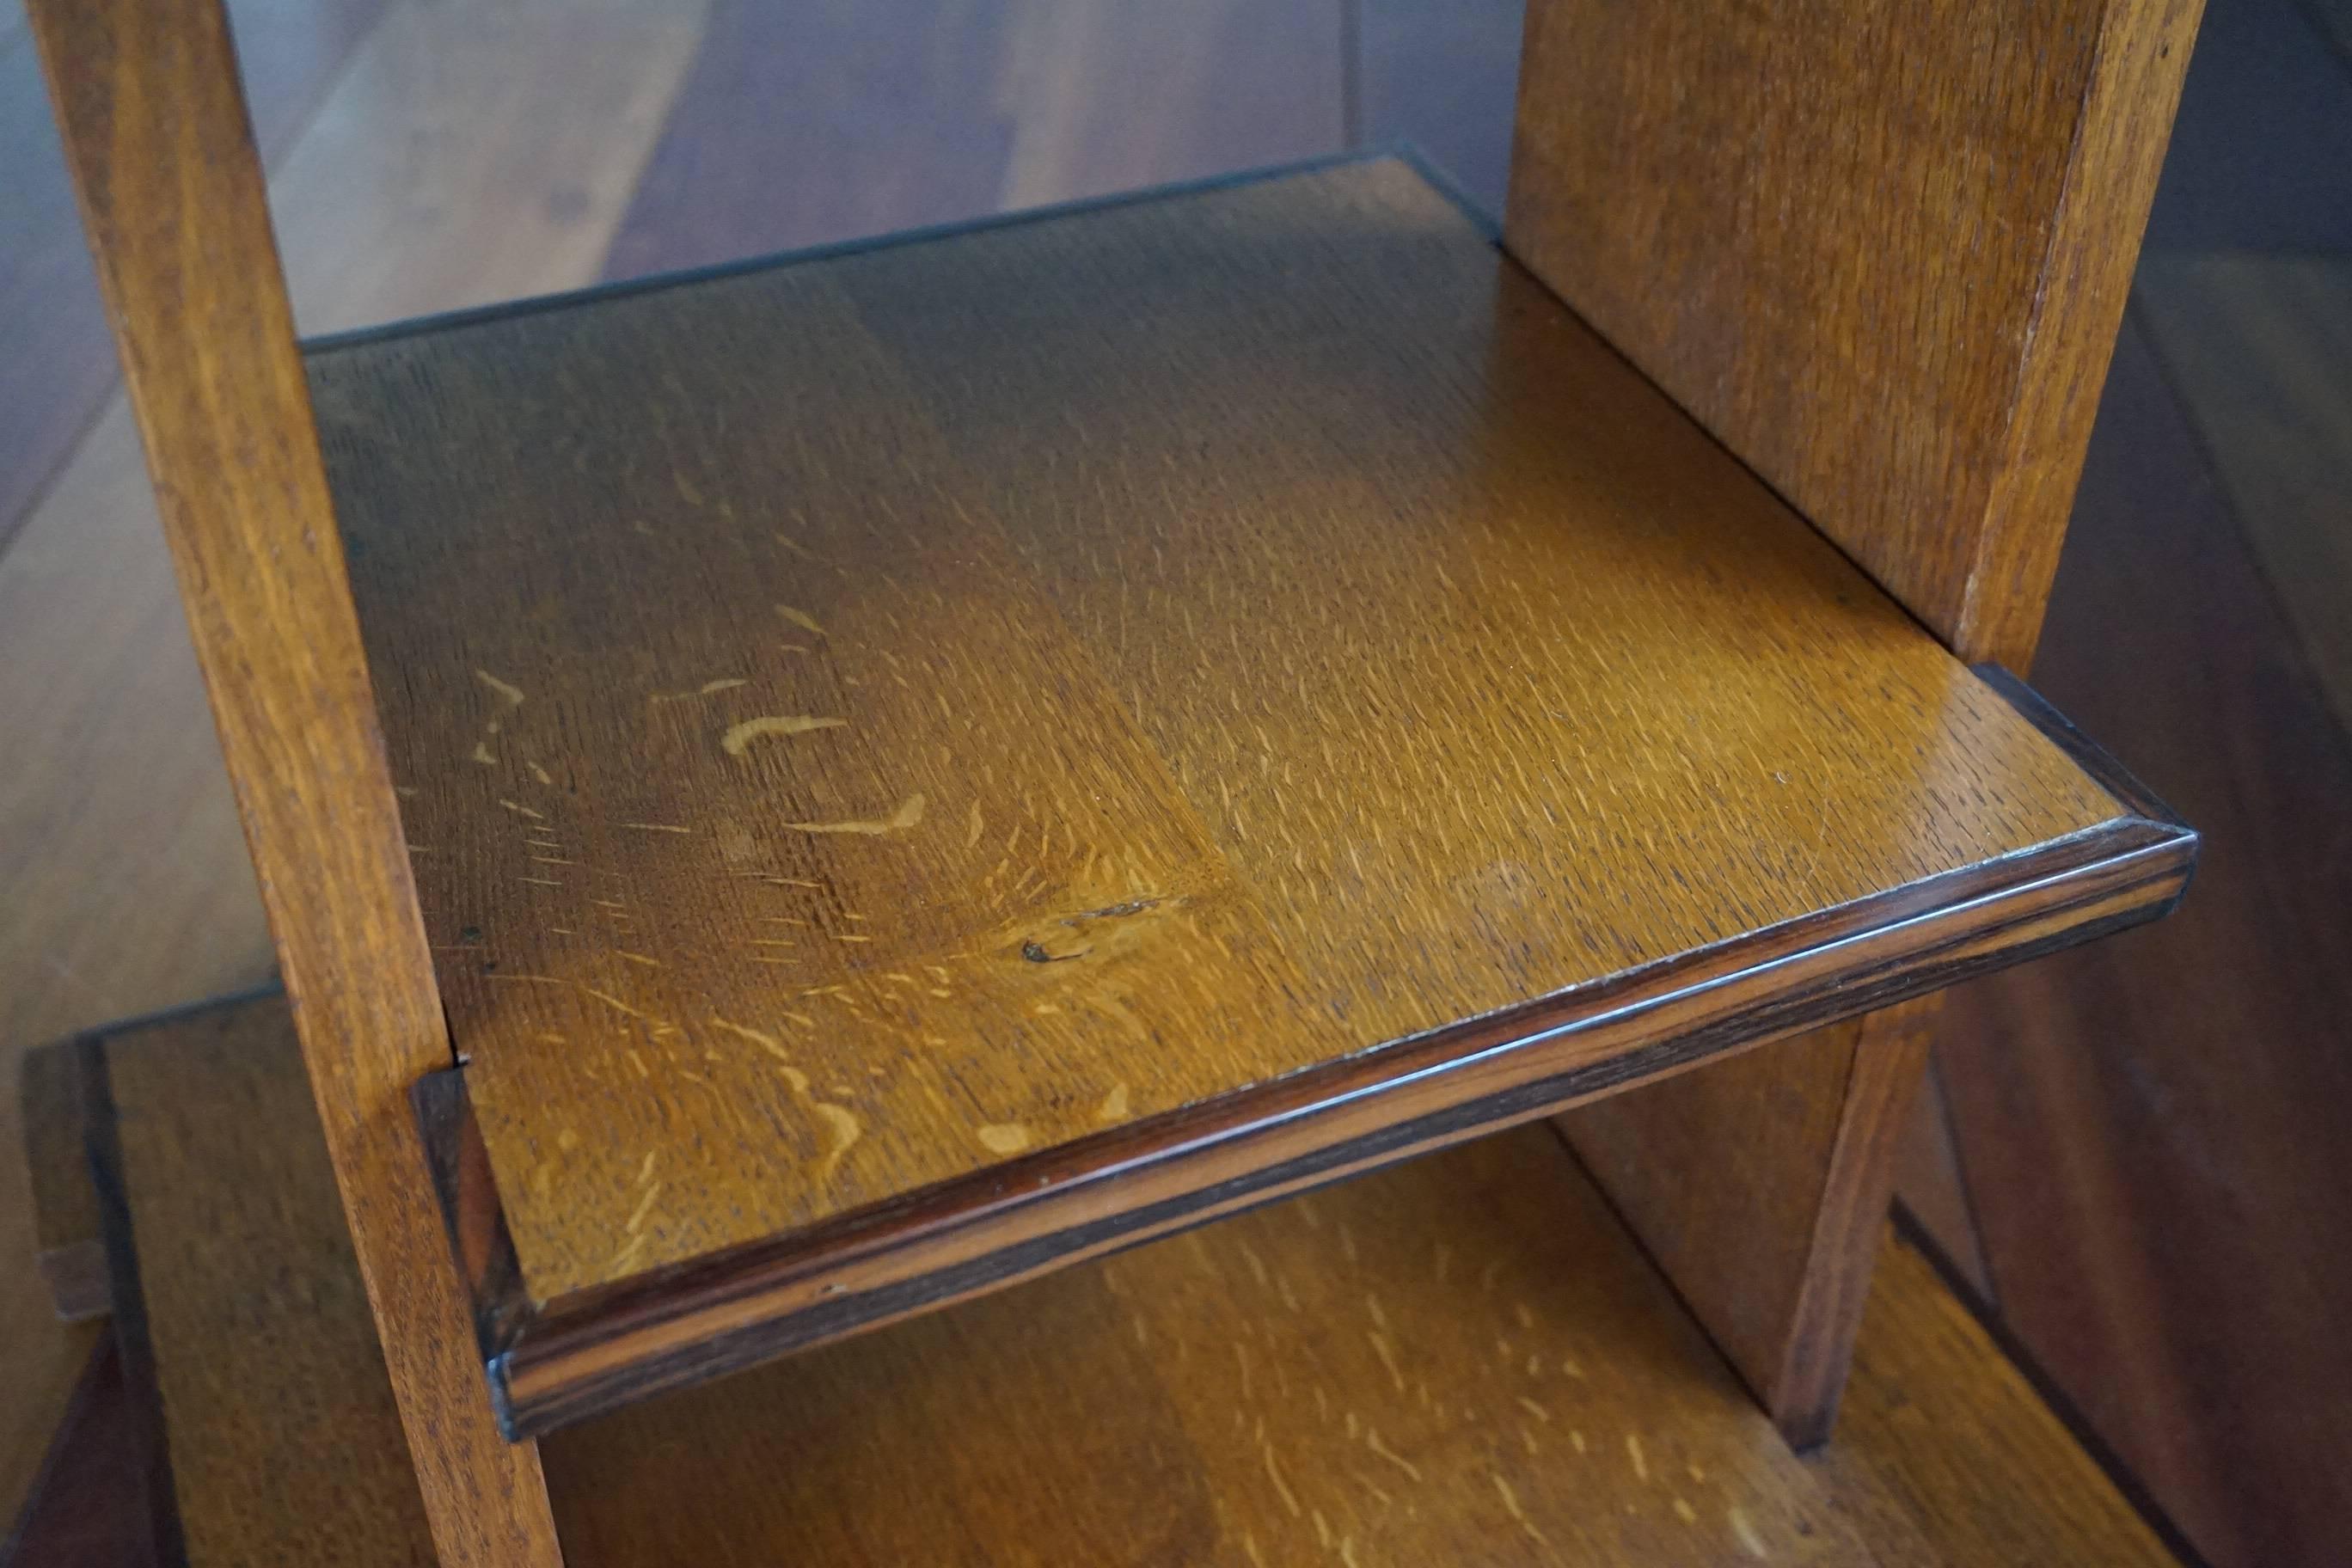 20th Century Stunning Dutch Arts and Crafts Design Coffee Table of Solid Oak and Coromandel